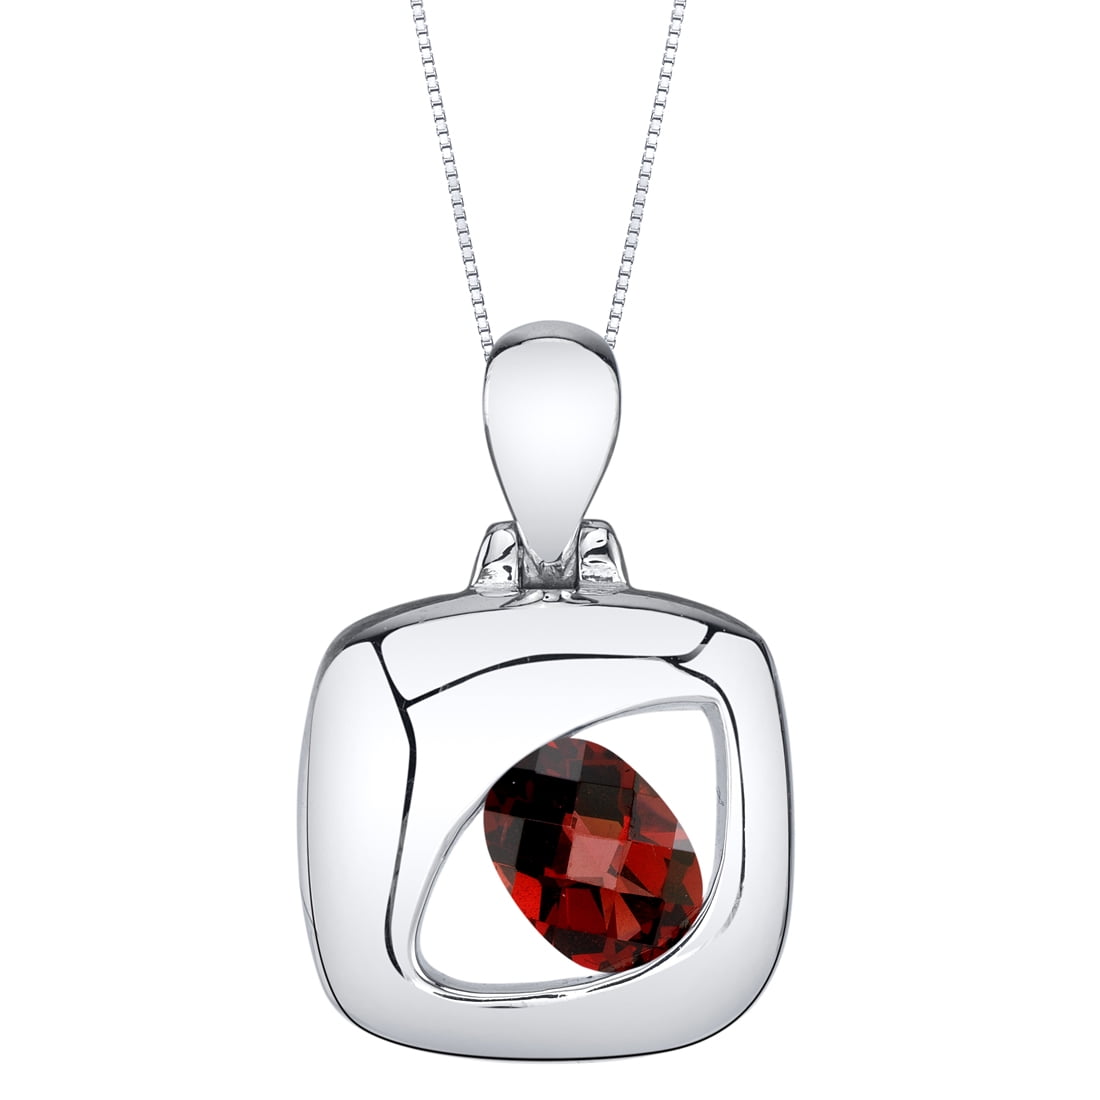 1 ct Oval Shape Red Garnet Pendant Necklace in Sterling Silver, 18 ...